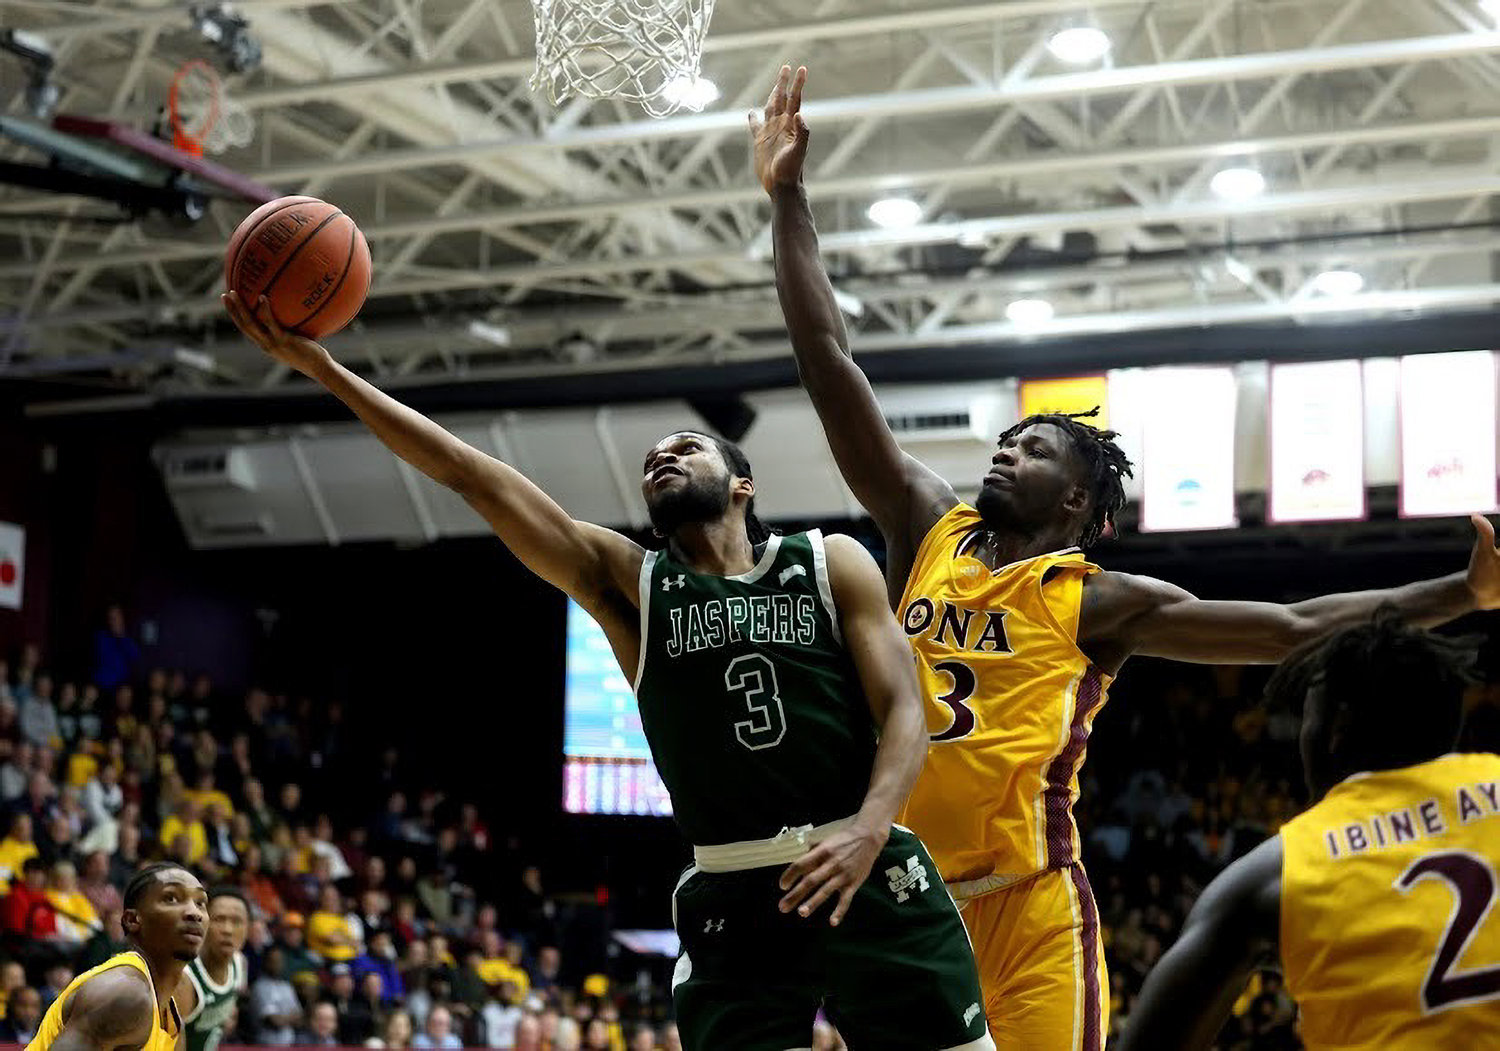 Manhattan’s Ant Nelson drives to the hoop against Iona in a game the Jaspers lost 71-60. The defeat sealed the series sweep for Iona, and the first in the rivalry since the 2017-18 season when Iona won all three matchups.